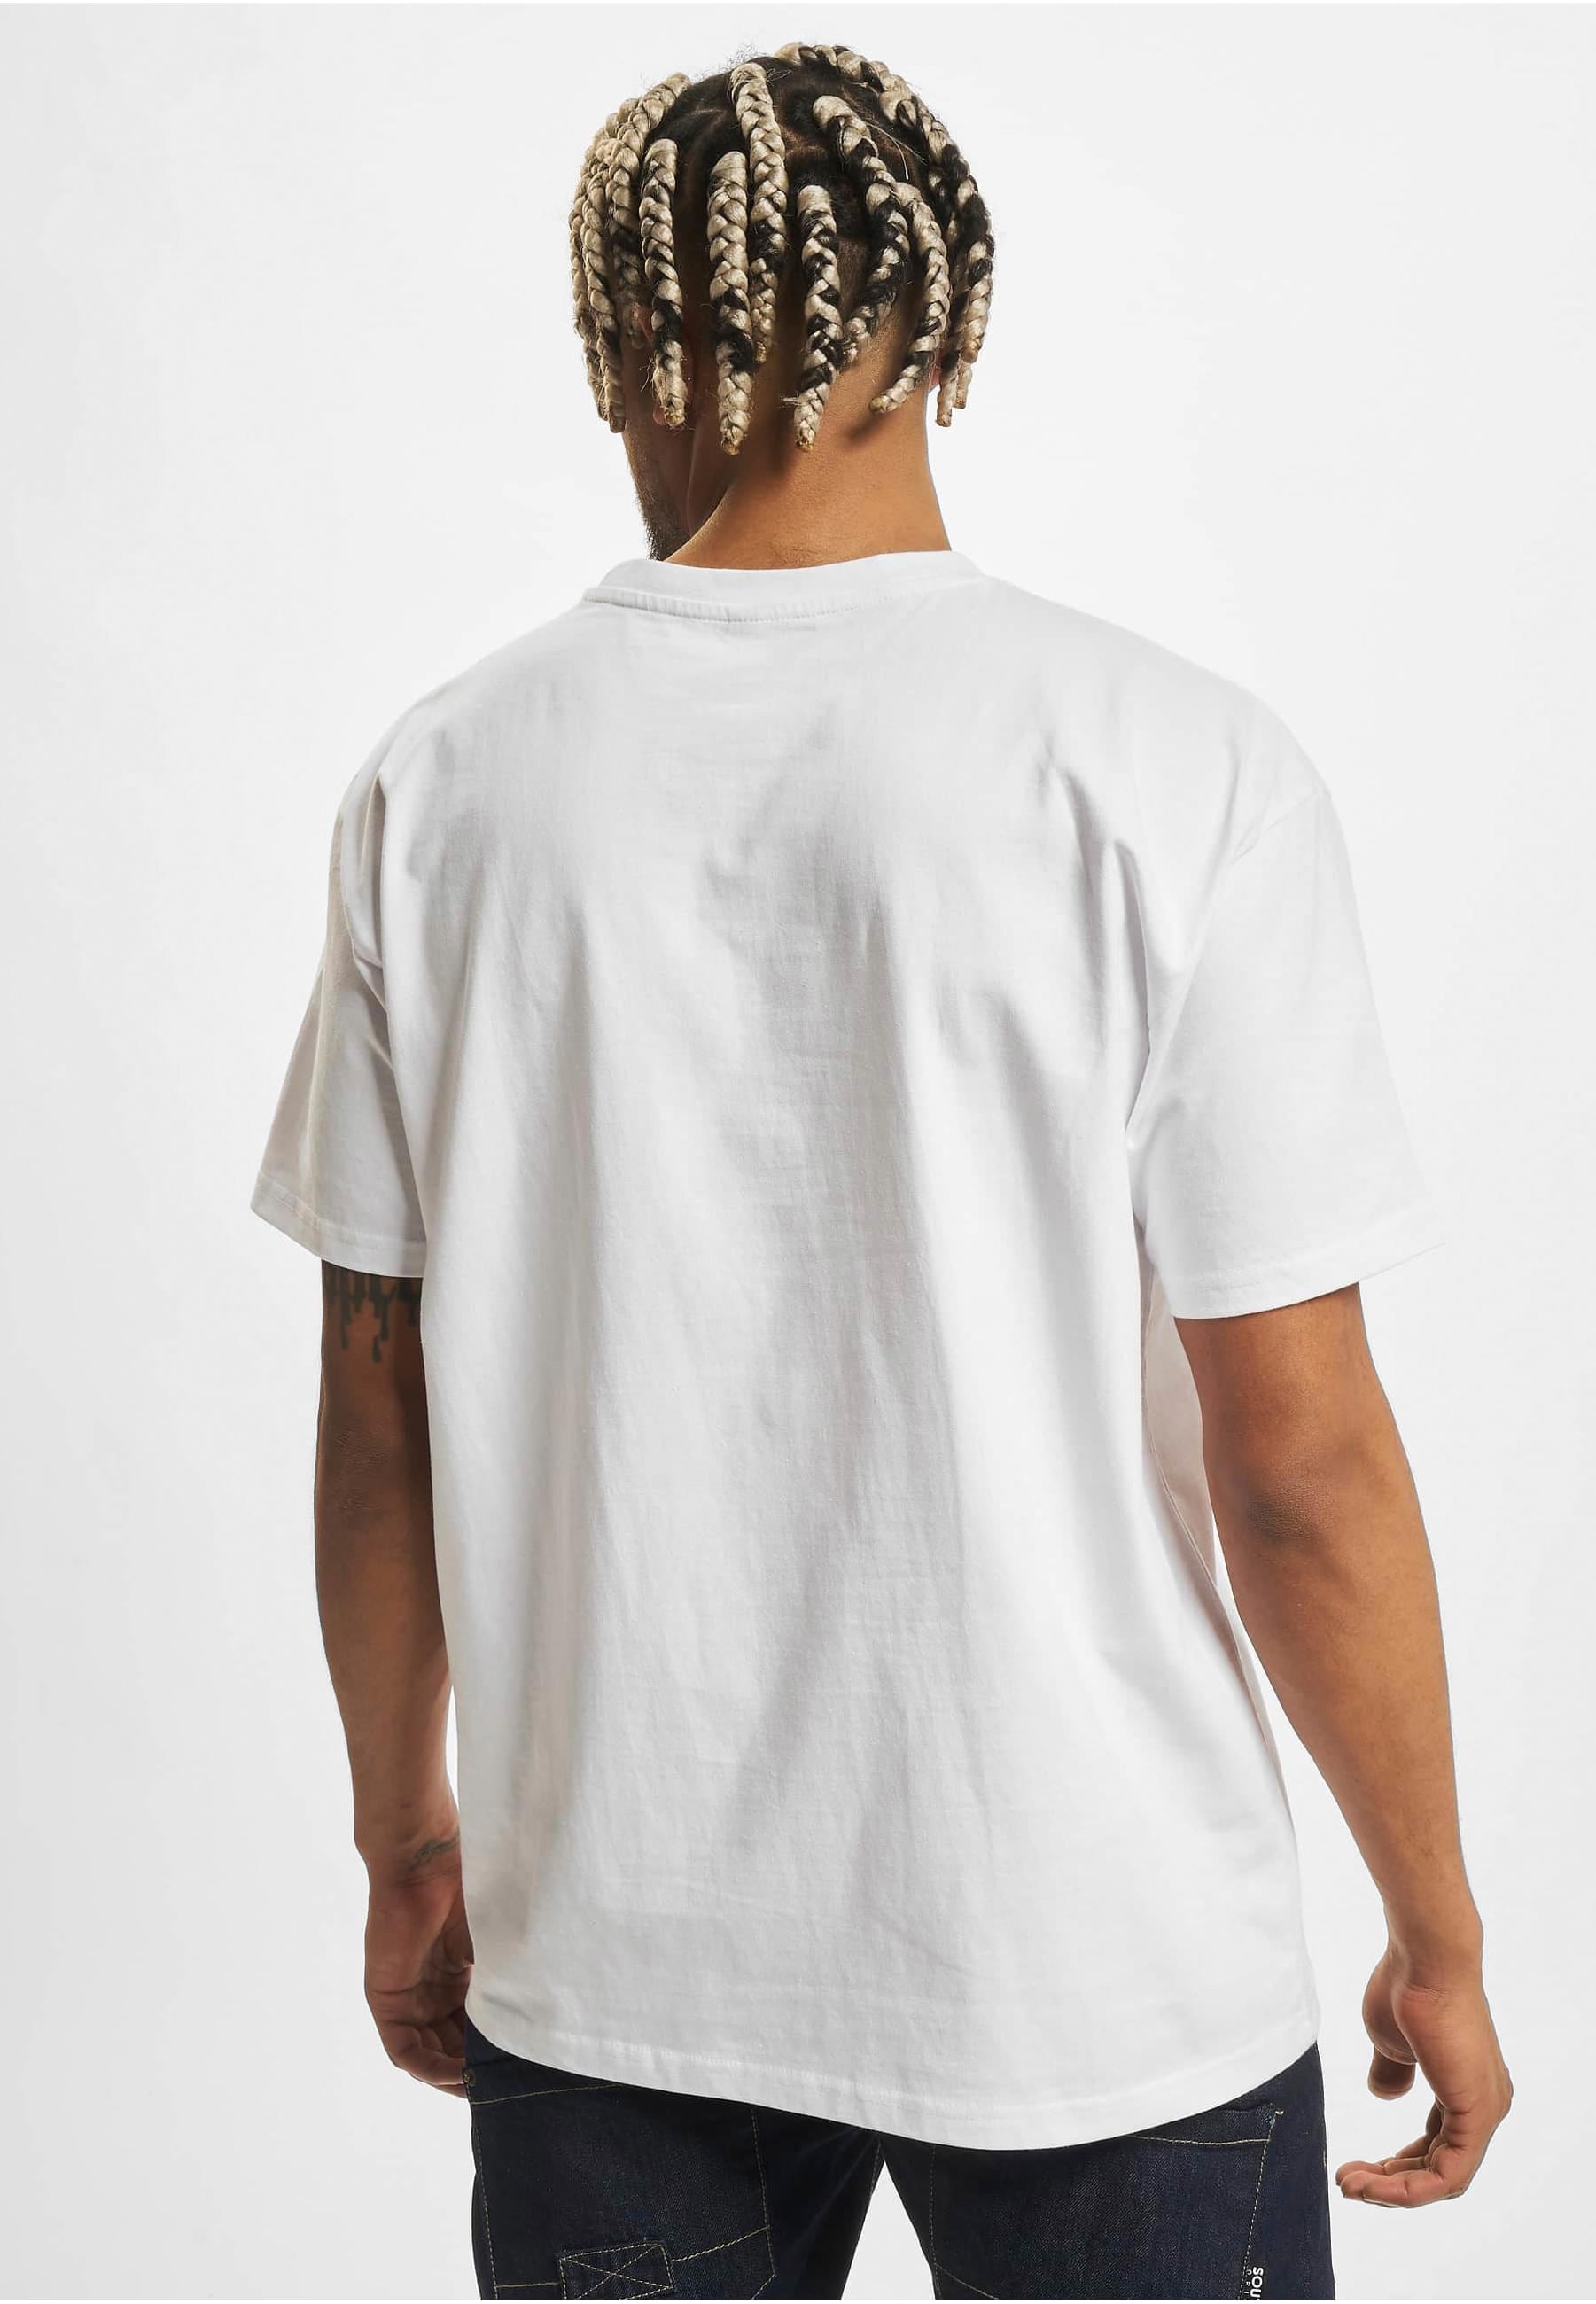 Upscale by Mister Tee T-Shirt »Upscale by Mister Tee Herren BRKLYN Oversize Tee«, (1 tlg.)